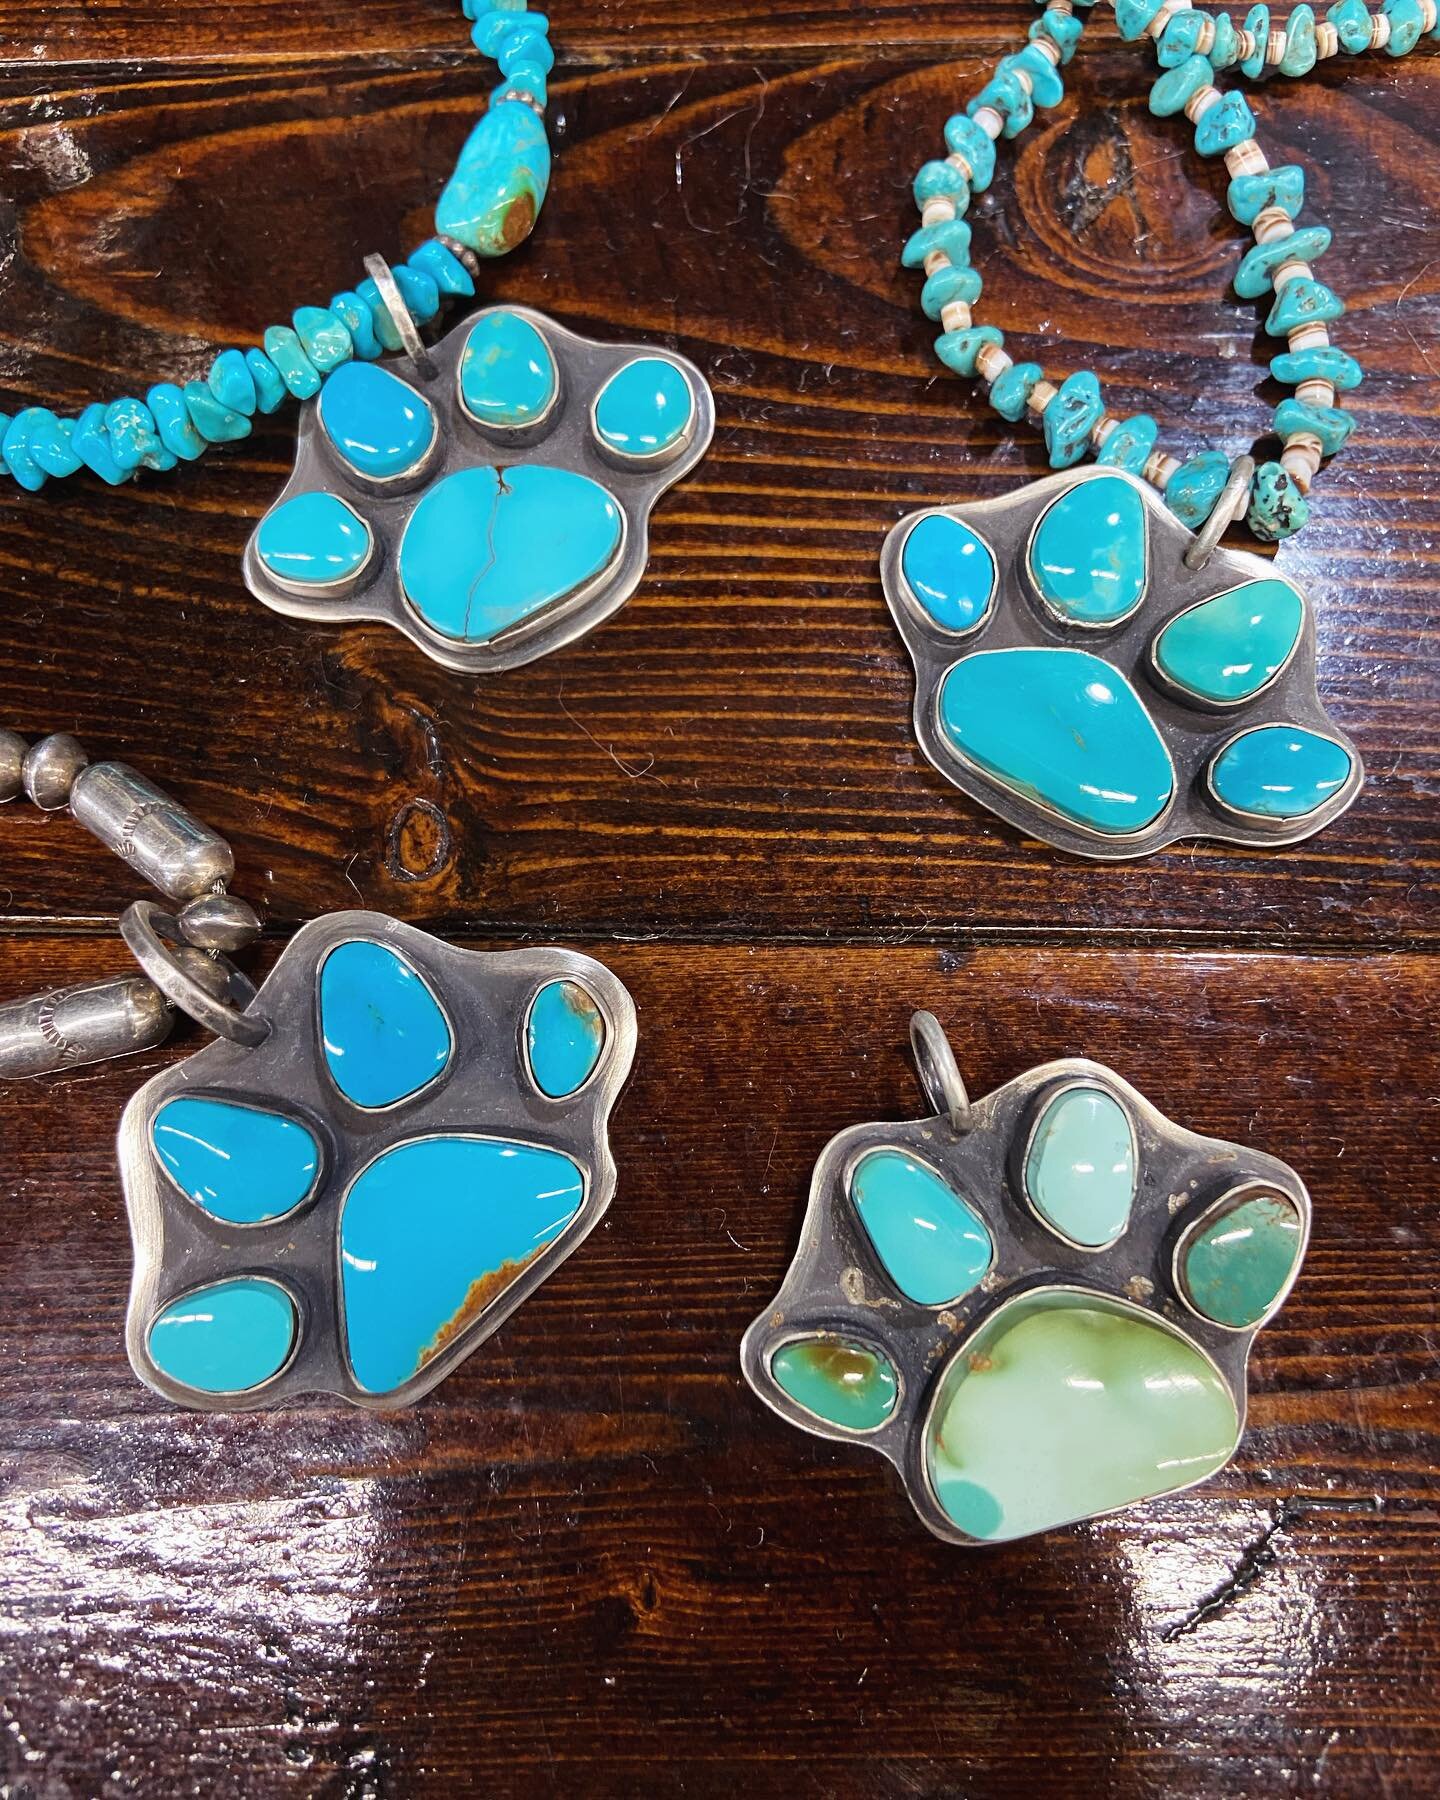 Turquoise and sterling silver dog paw pendants available here at the Fort Worth Kennel Club dog show at Will Rogers. Grab yours before they run away🐾
#bhdjewelry #bunkhousedesignsjewelry #lizbell